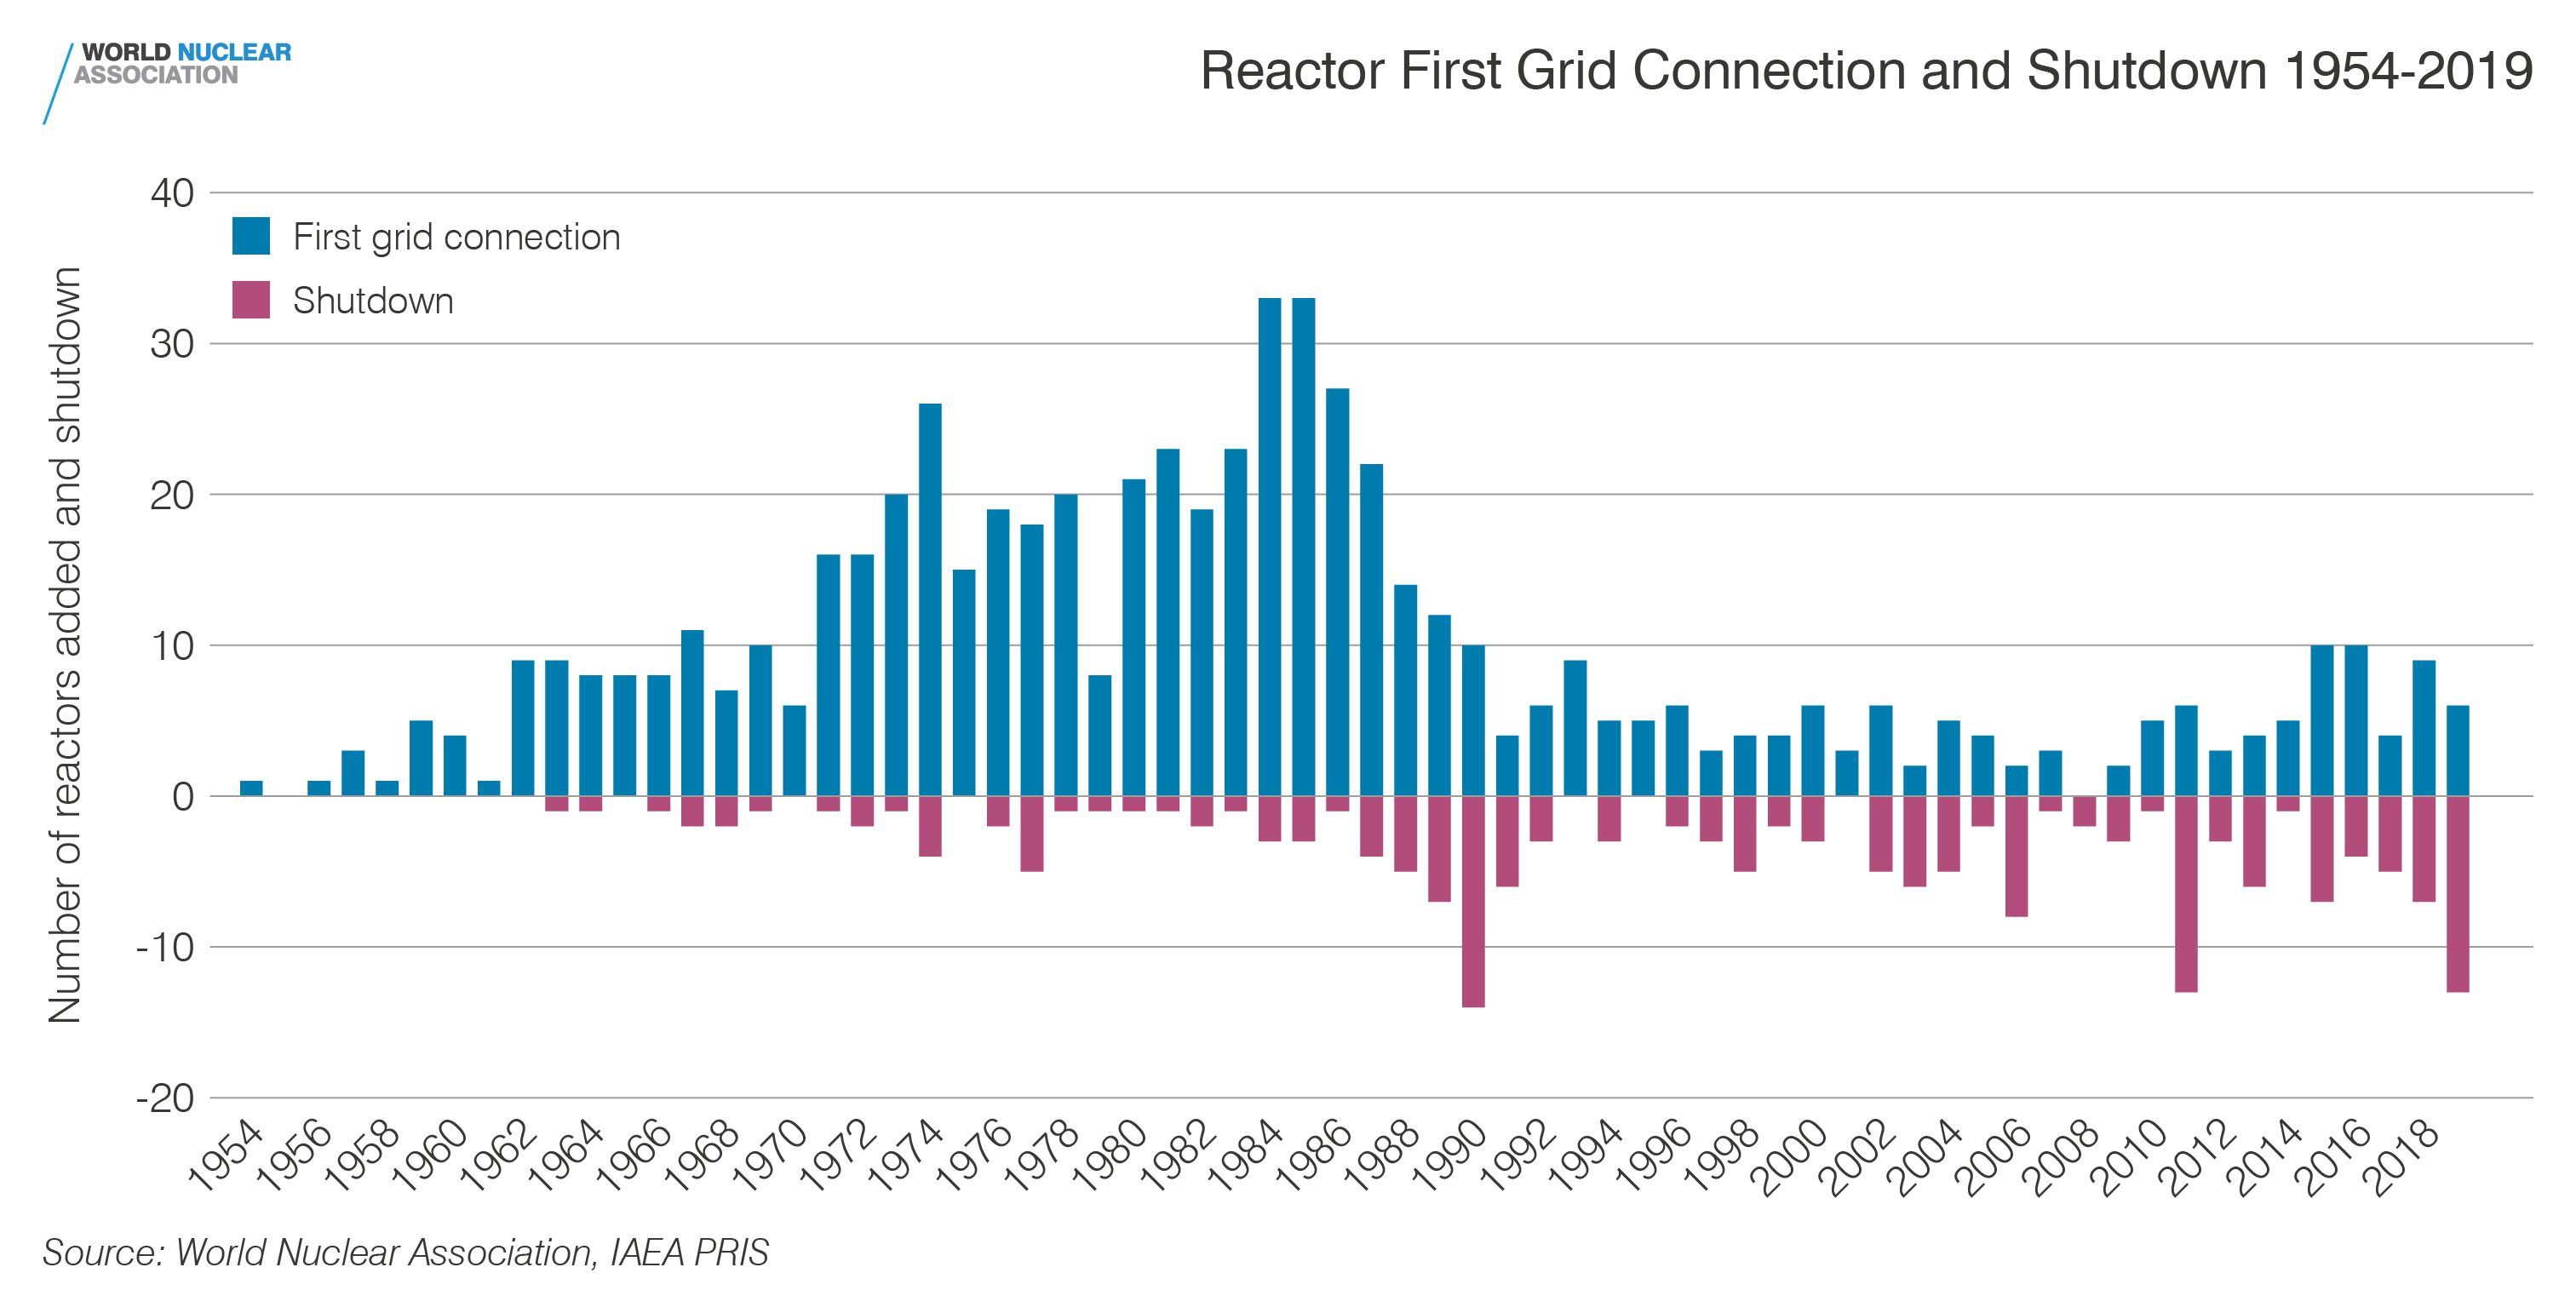 Reactor grid connection and shutdown 1954-2019